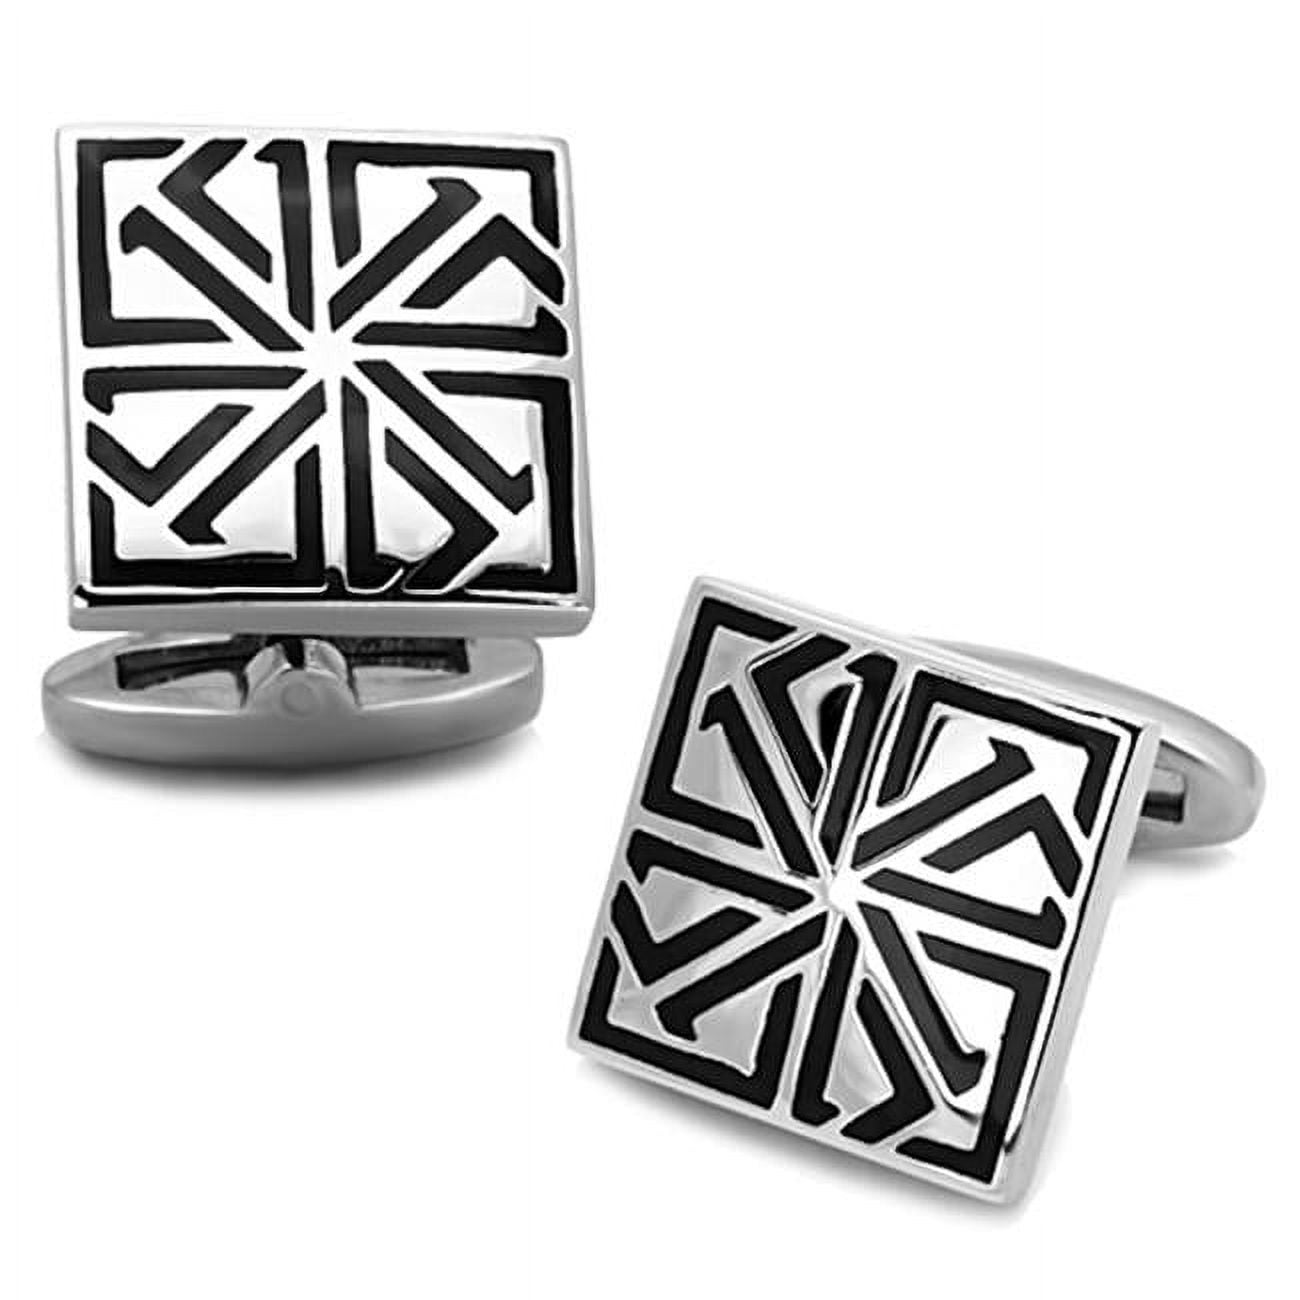 Picture of Alamode TK1253 Men High Polished Stainless Steel Cufflink with Epoxy in Jet